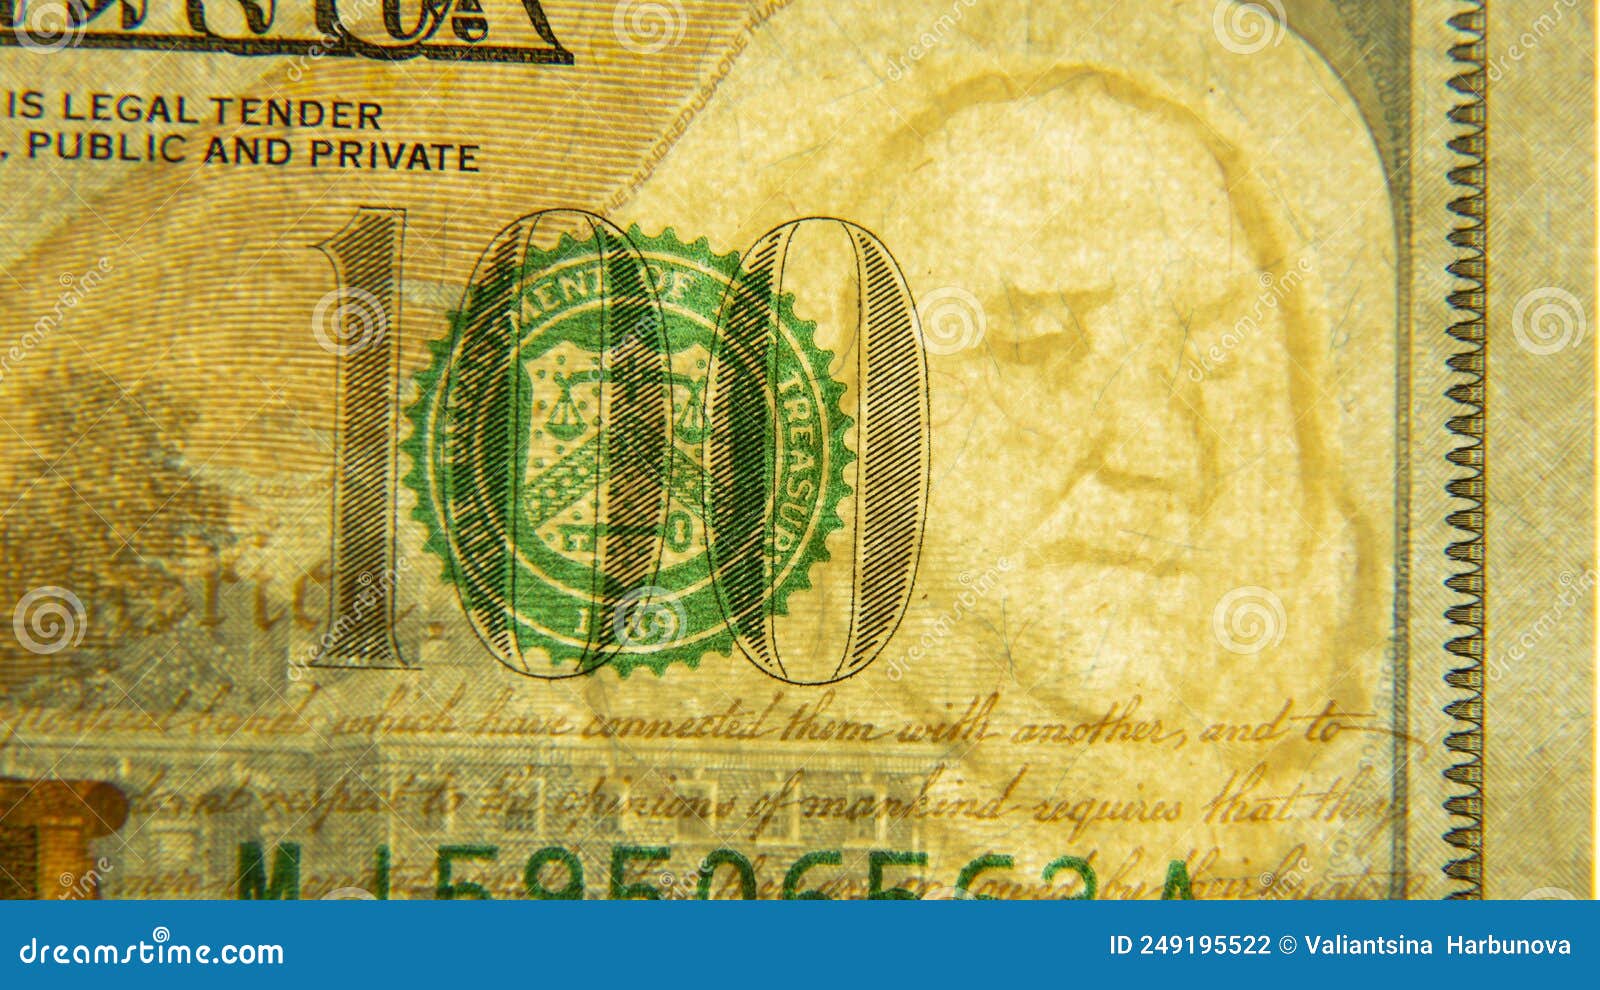 one hundred us dollars close-up with watermark.